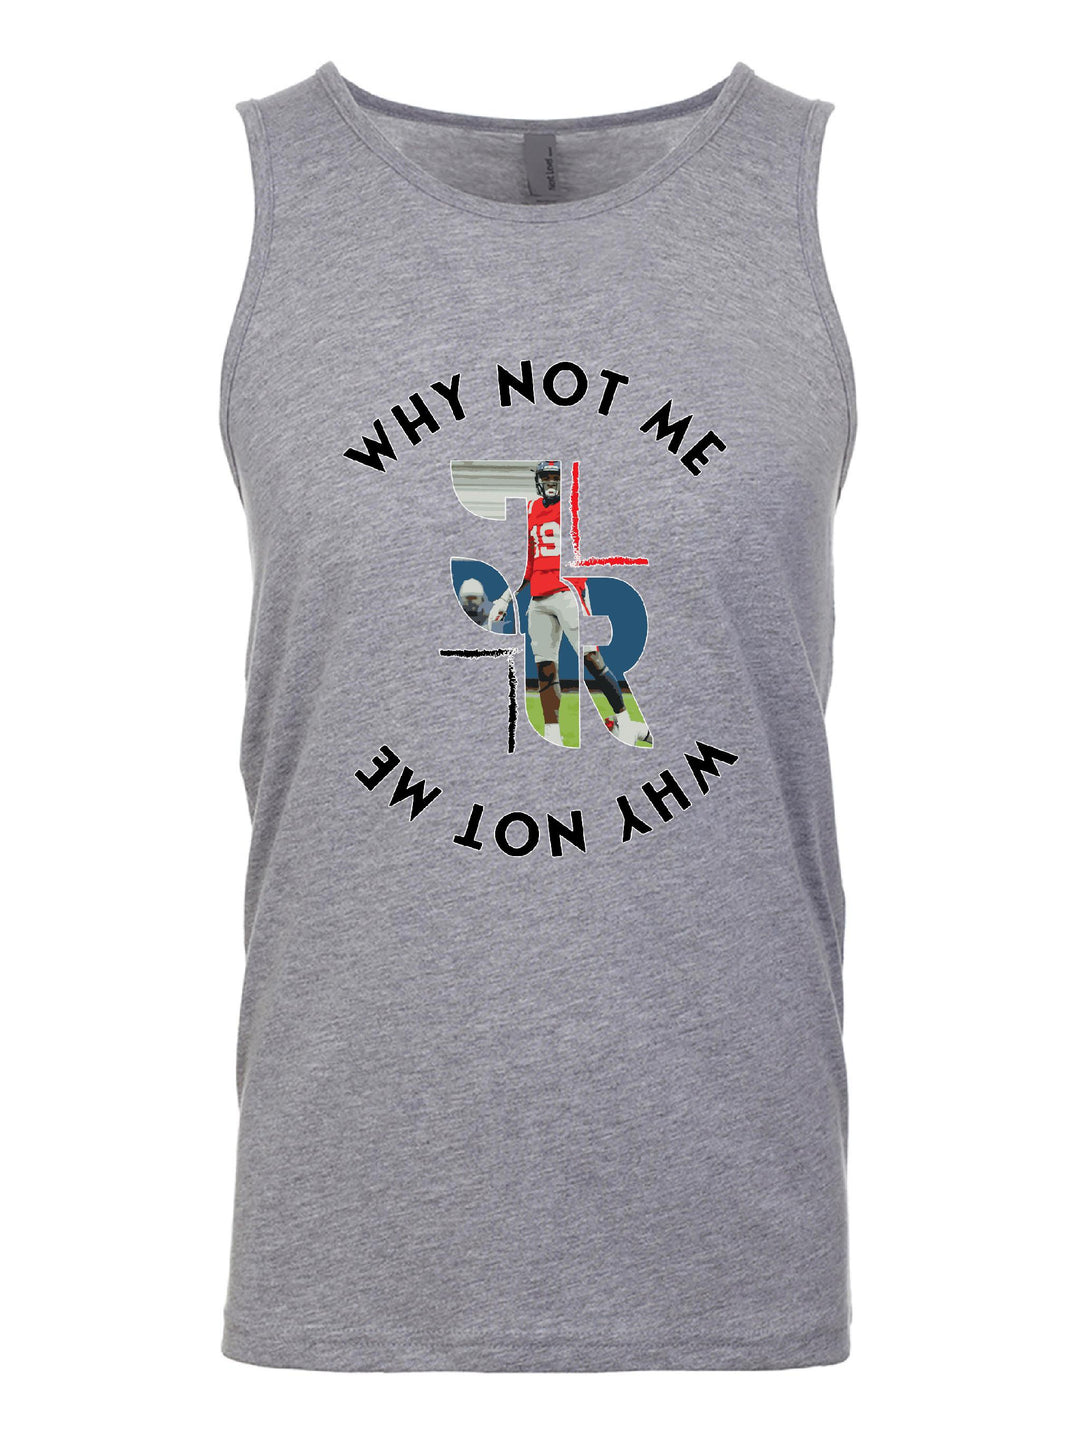 Why Not Me Tank Top